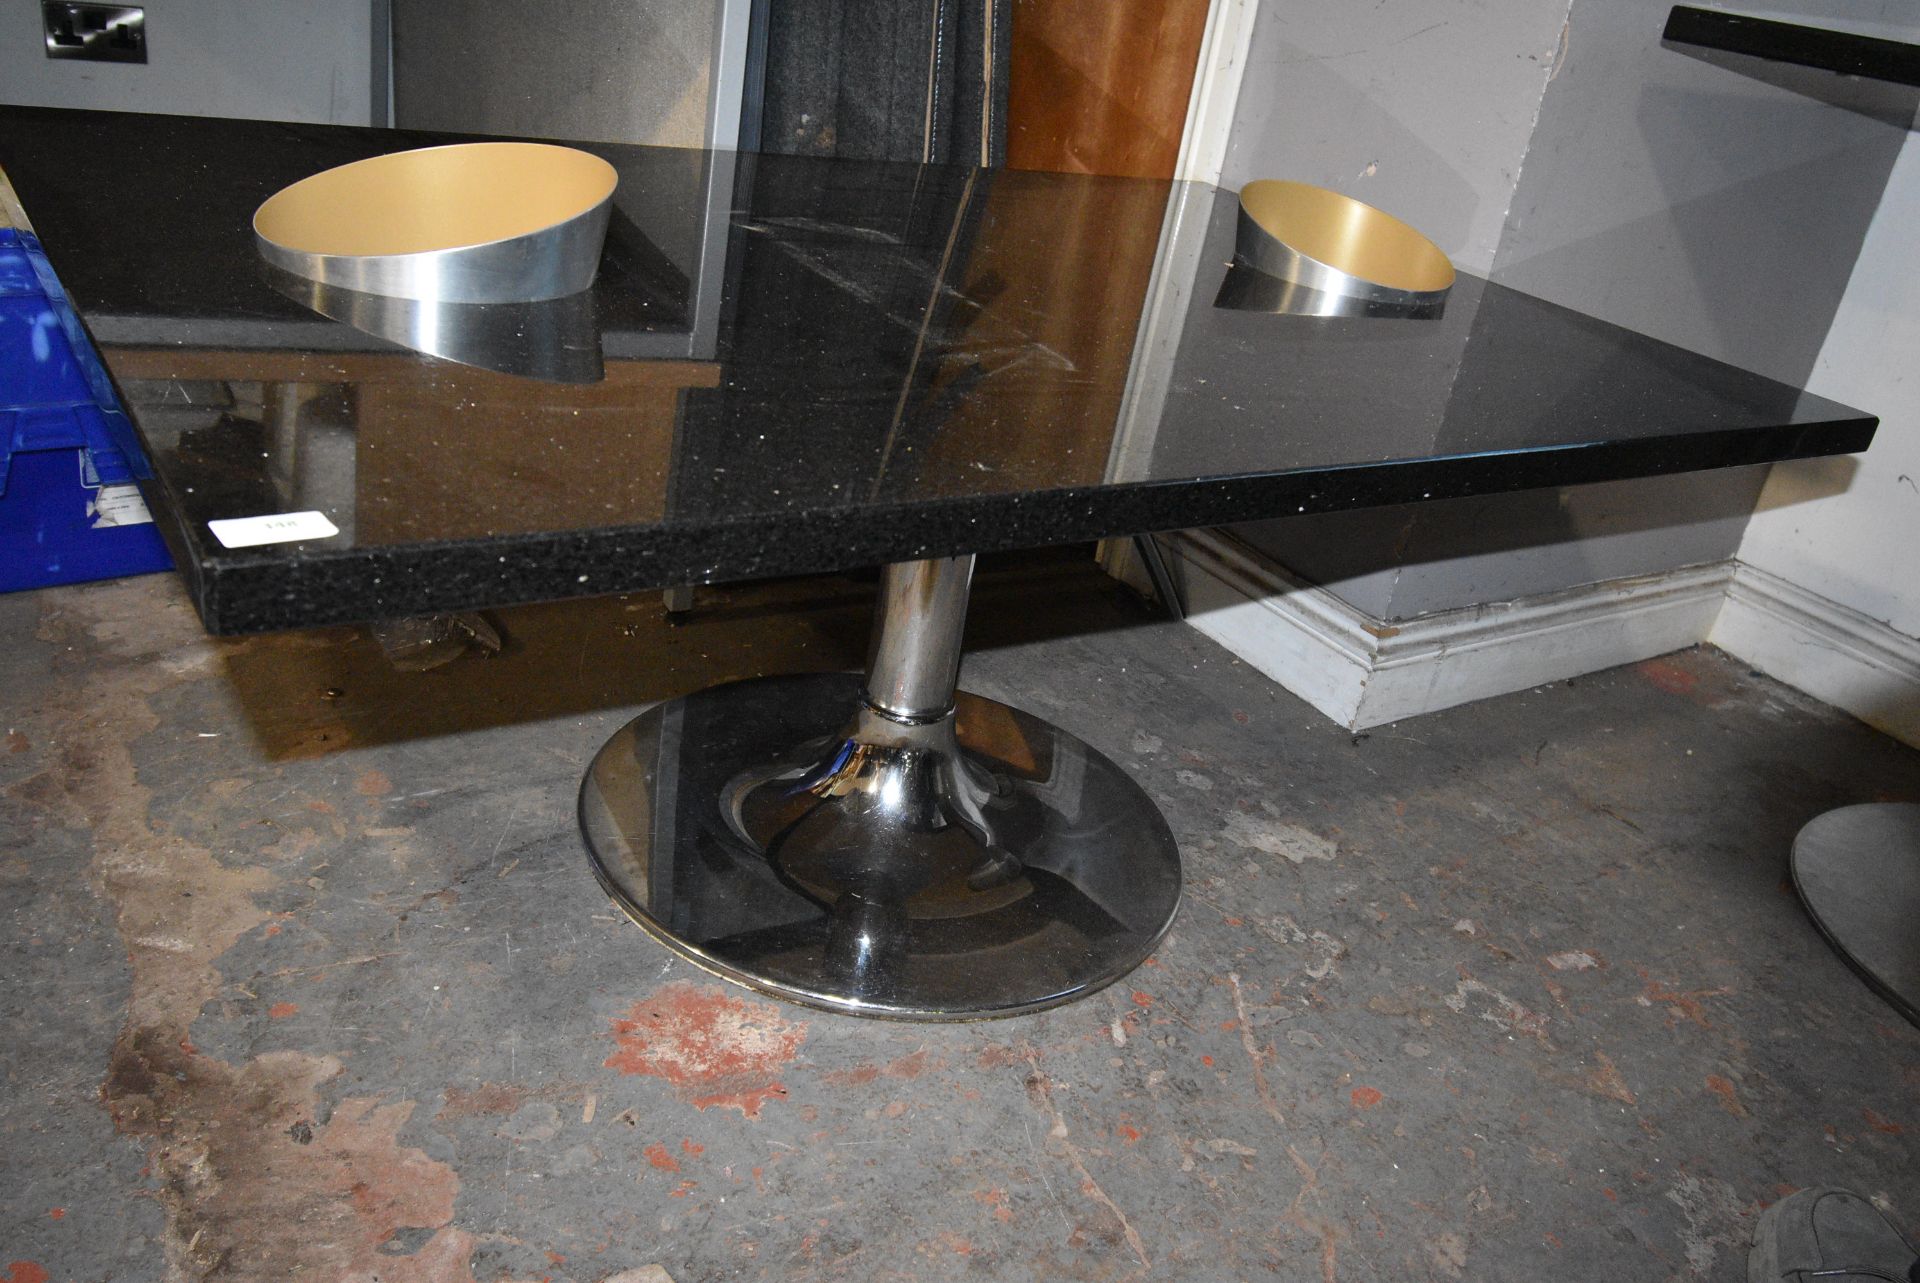 Rectangular Black Granite Single Pedestal Table with Two Champagne Bucket 120x80cm x 50cm high - Image 2 of 2